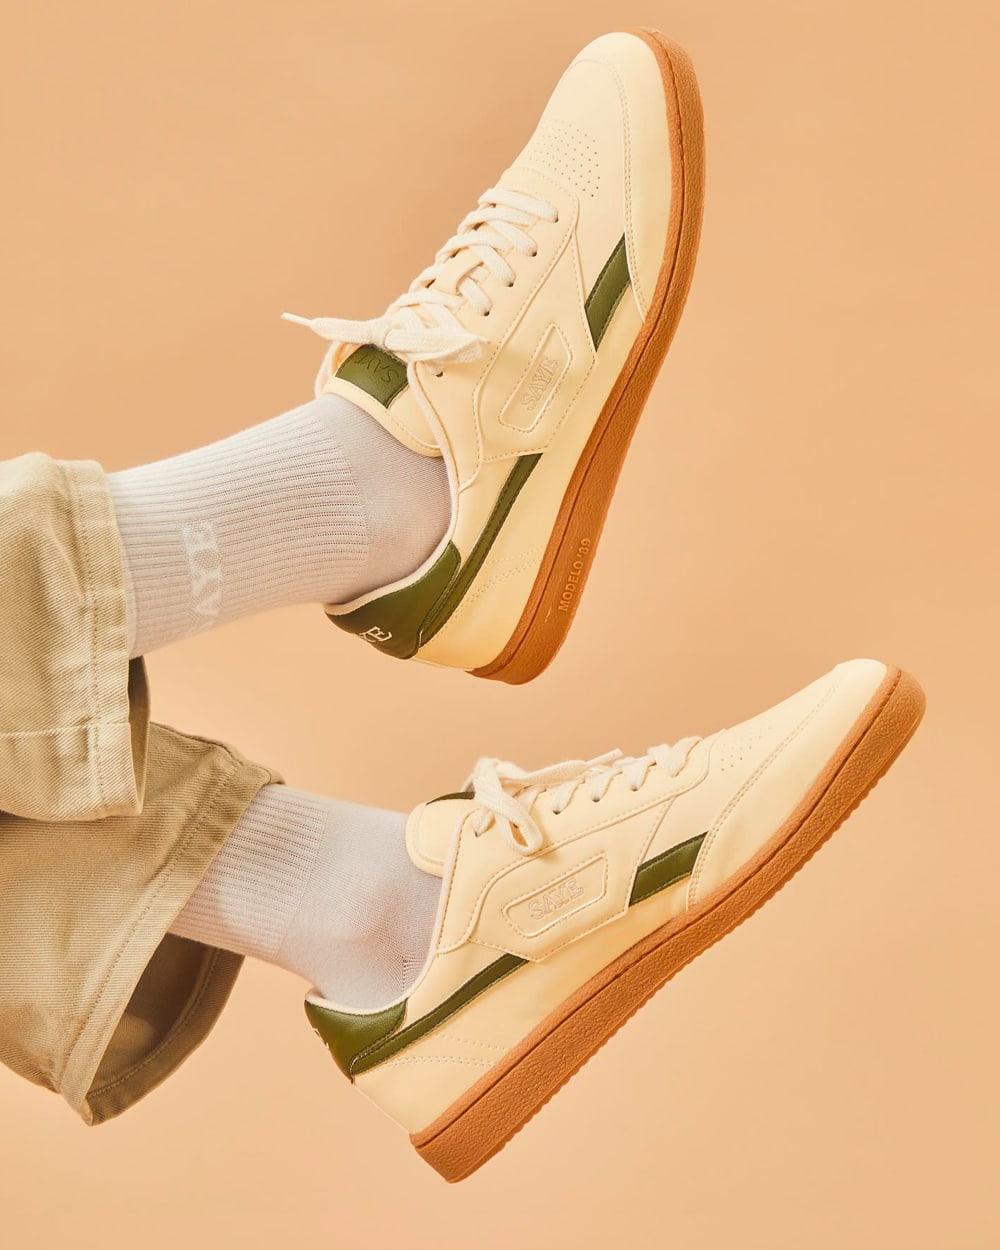 Men's SAYE off-white and green gumsole sneakers worn on feet with white socks and khaki pants